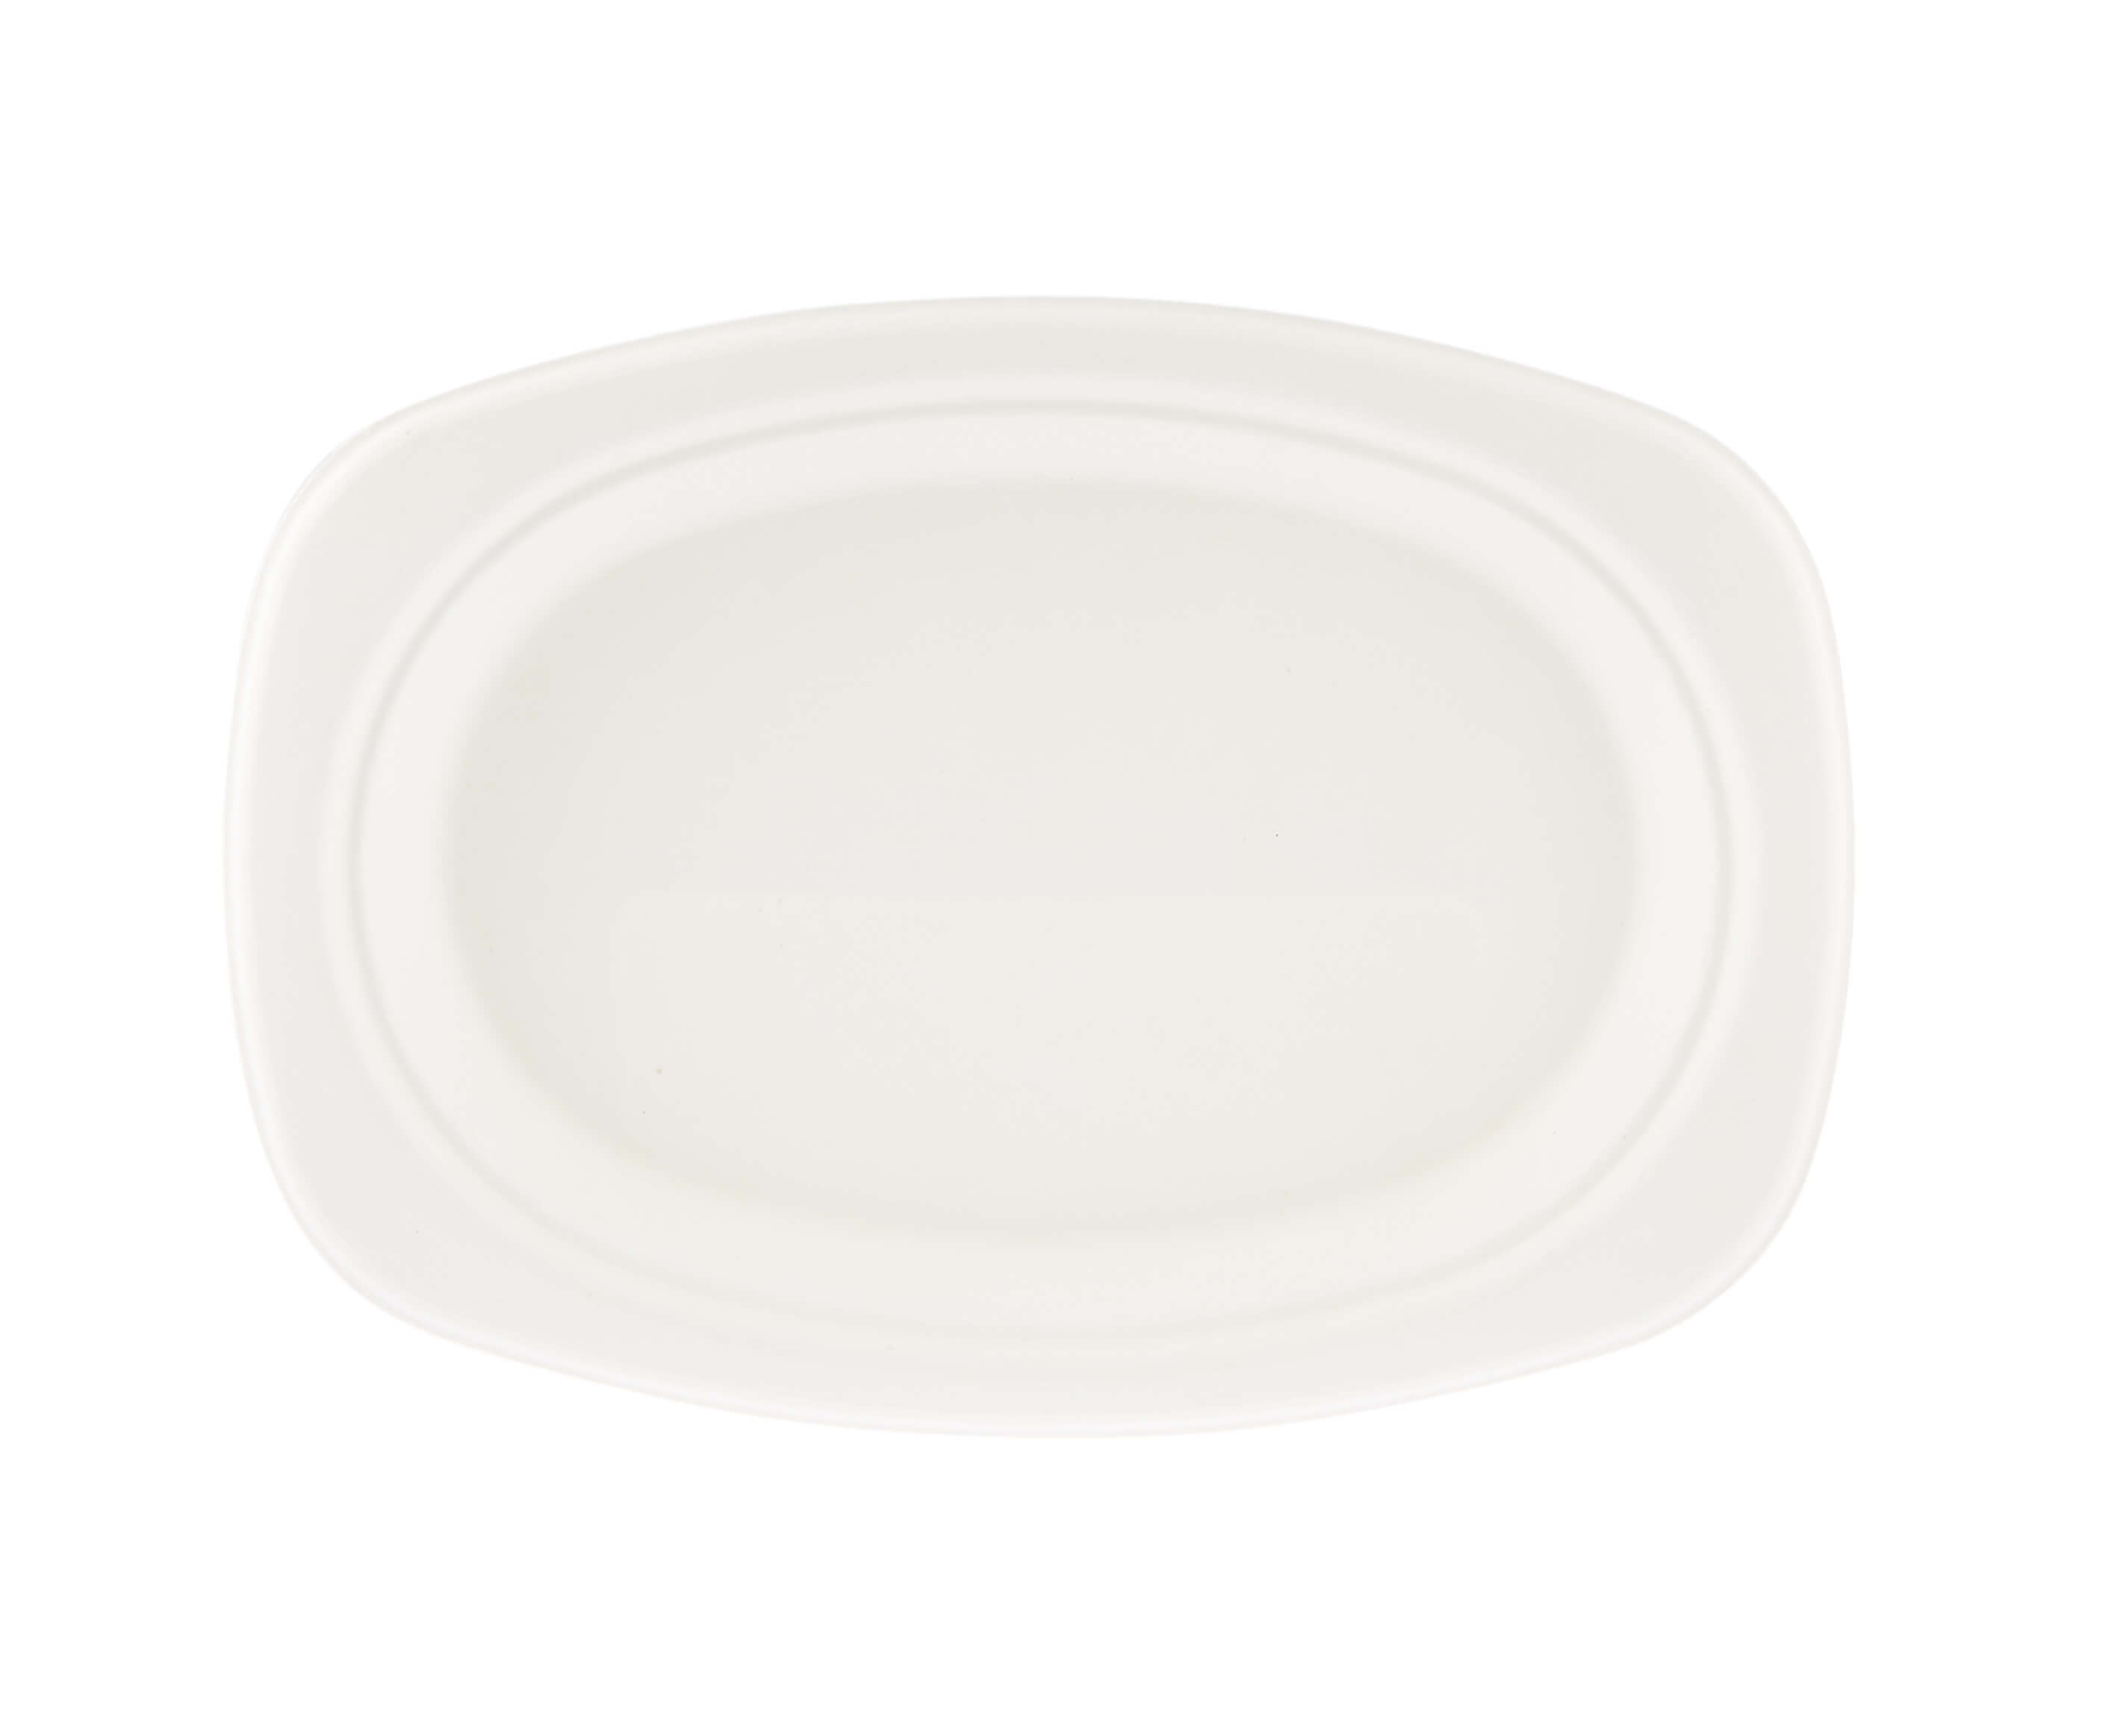 Bio-Degradable Oval Plate 9x6.5 Inch 500 Pieces - Hotpack Global